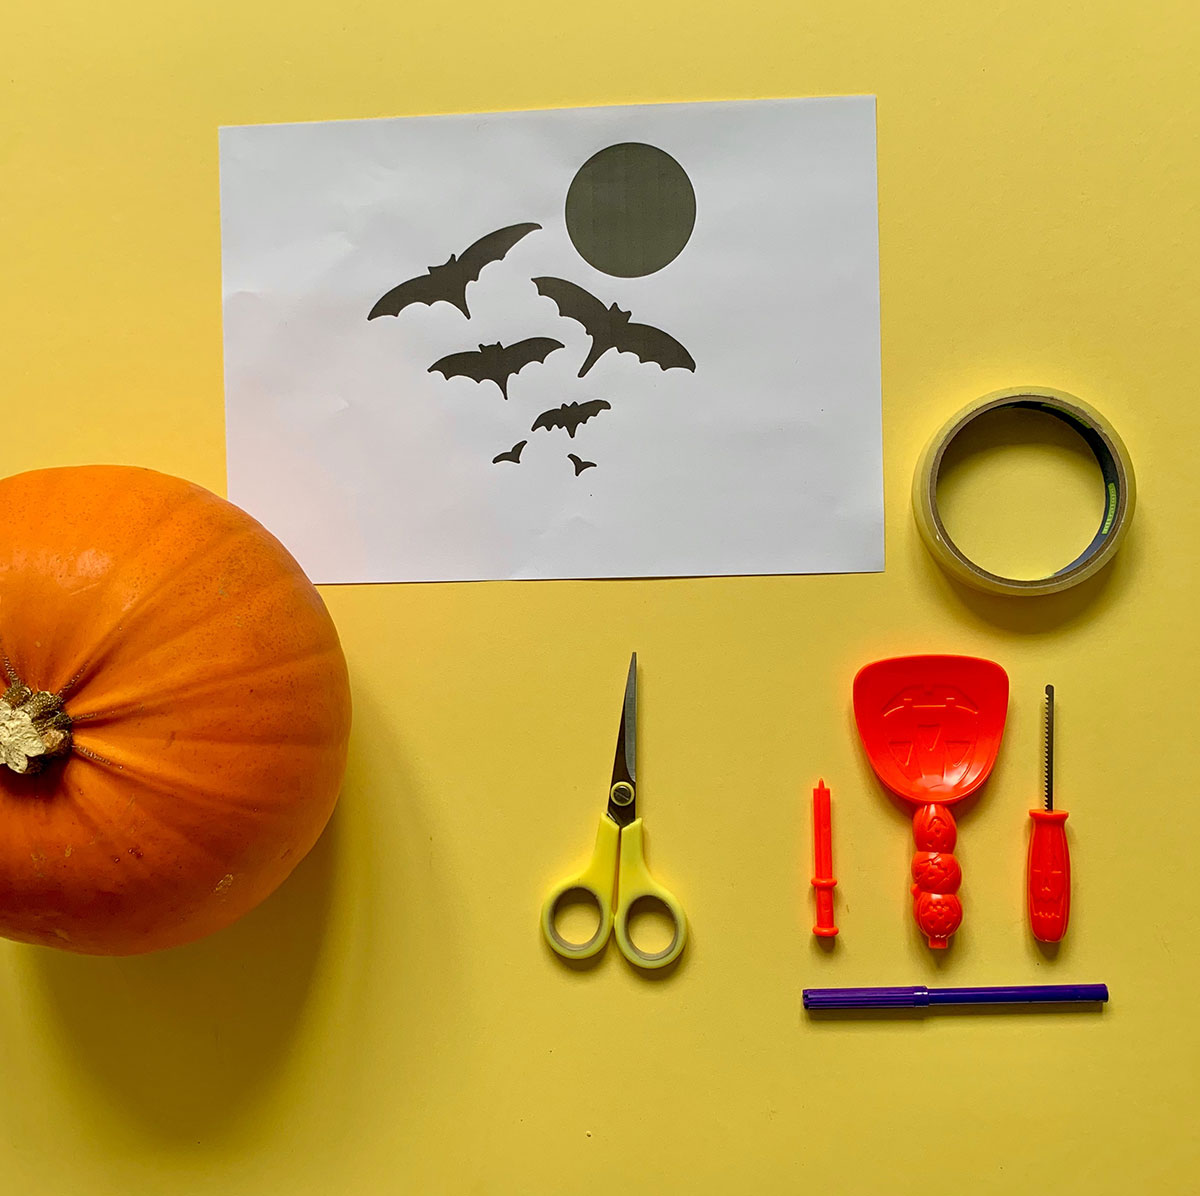 A photo with all the materials you will need for pumpkin carving including a pumpkin, stencil print out, scissors, sticky tape, a scoop, a poker, small serrated knife, and coloured pen